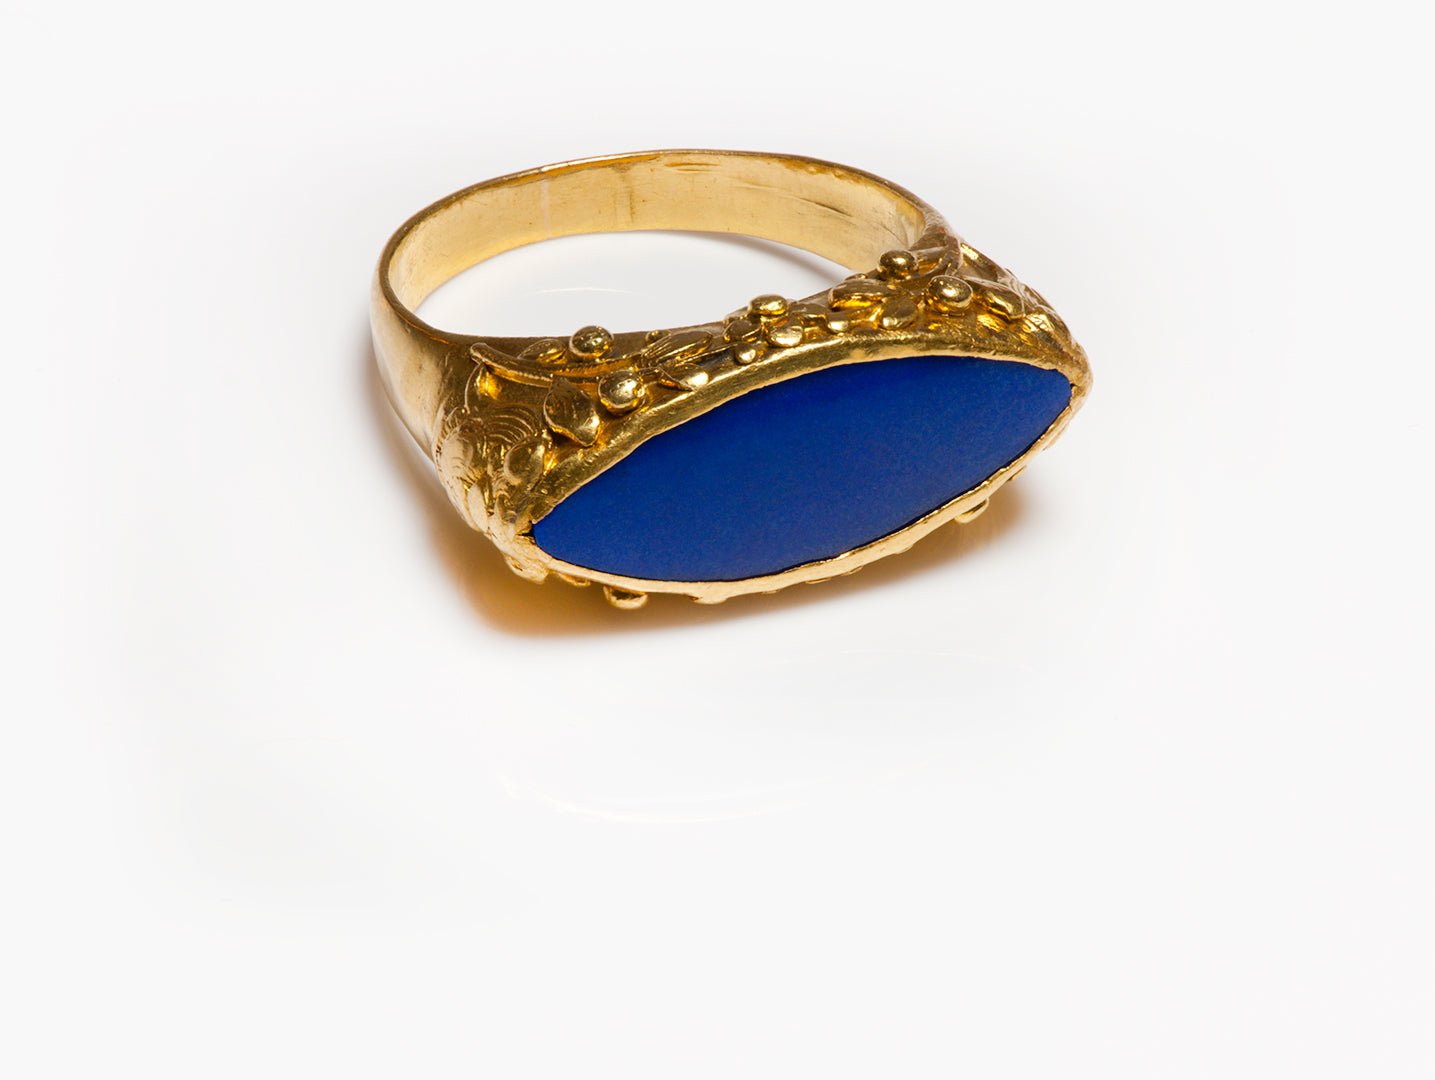 Antique Chinese 22K Gold Lapis Men's Ring - DSF Antique Jewelry